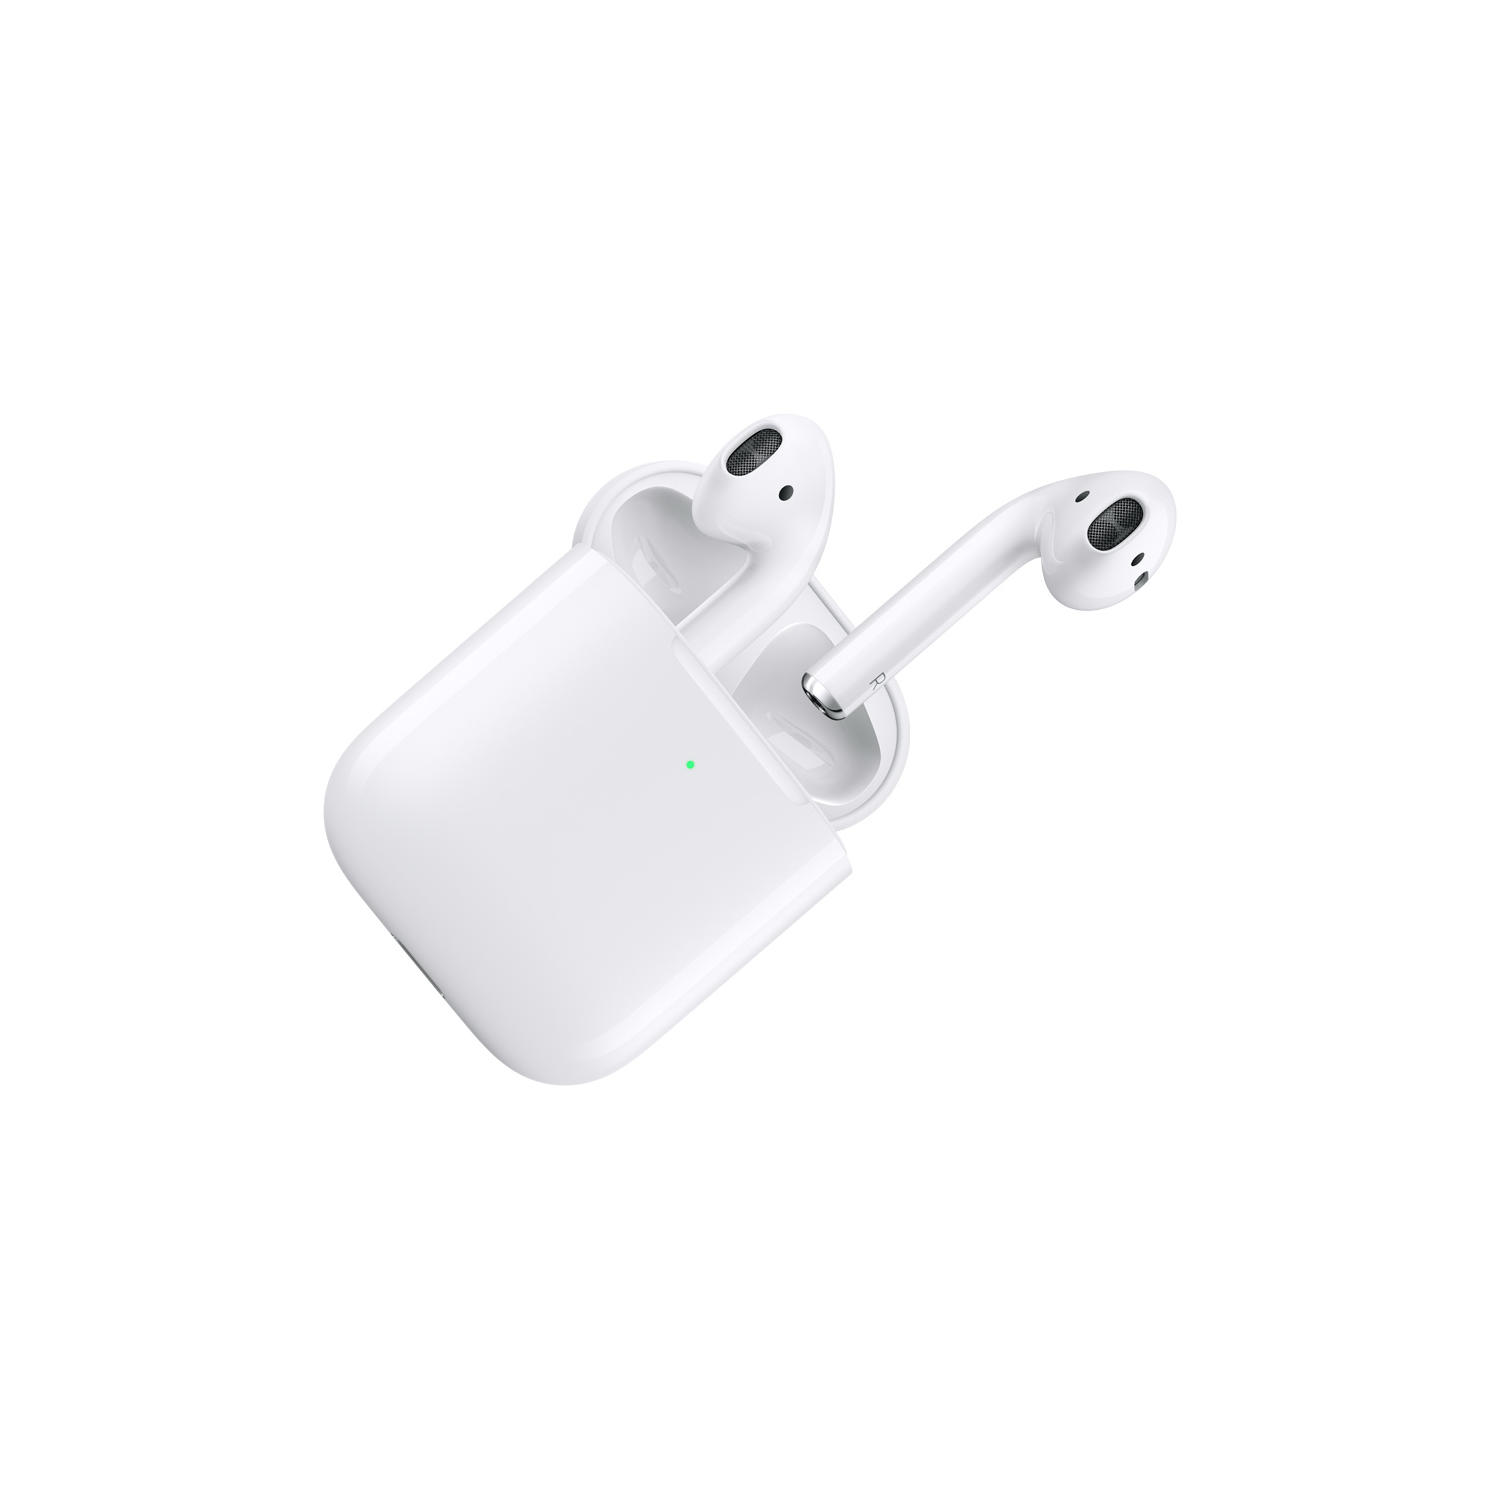 Apple AirPods (MRXJ2AM/A) with Wireless Charging Case